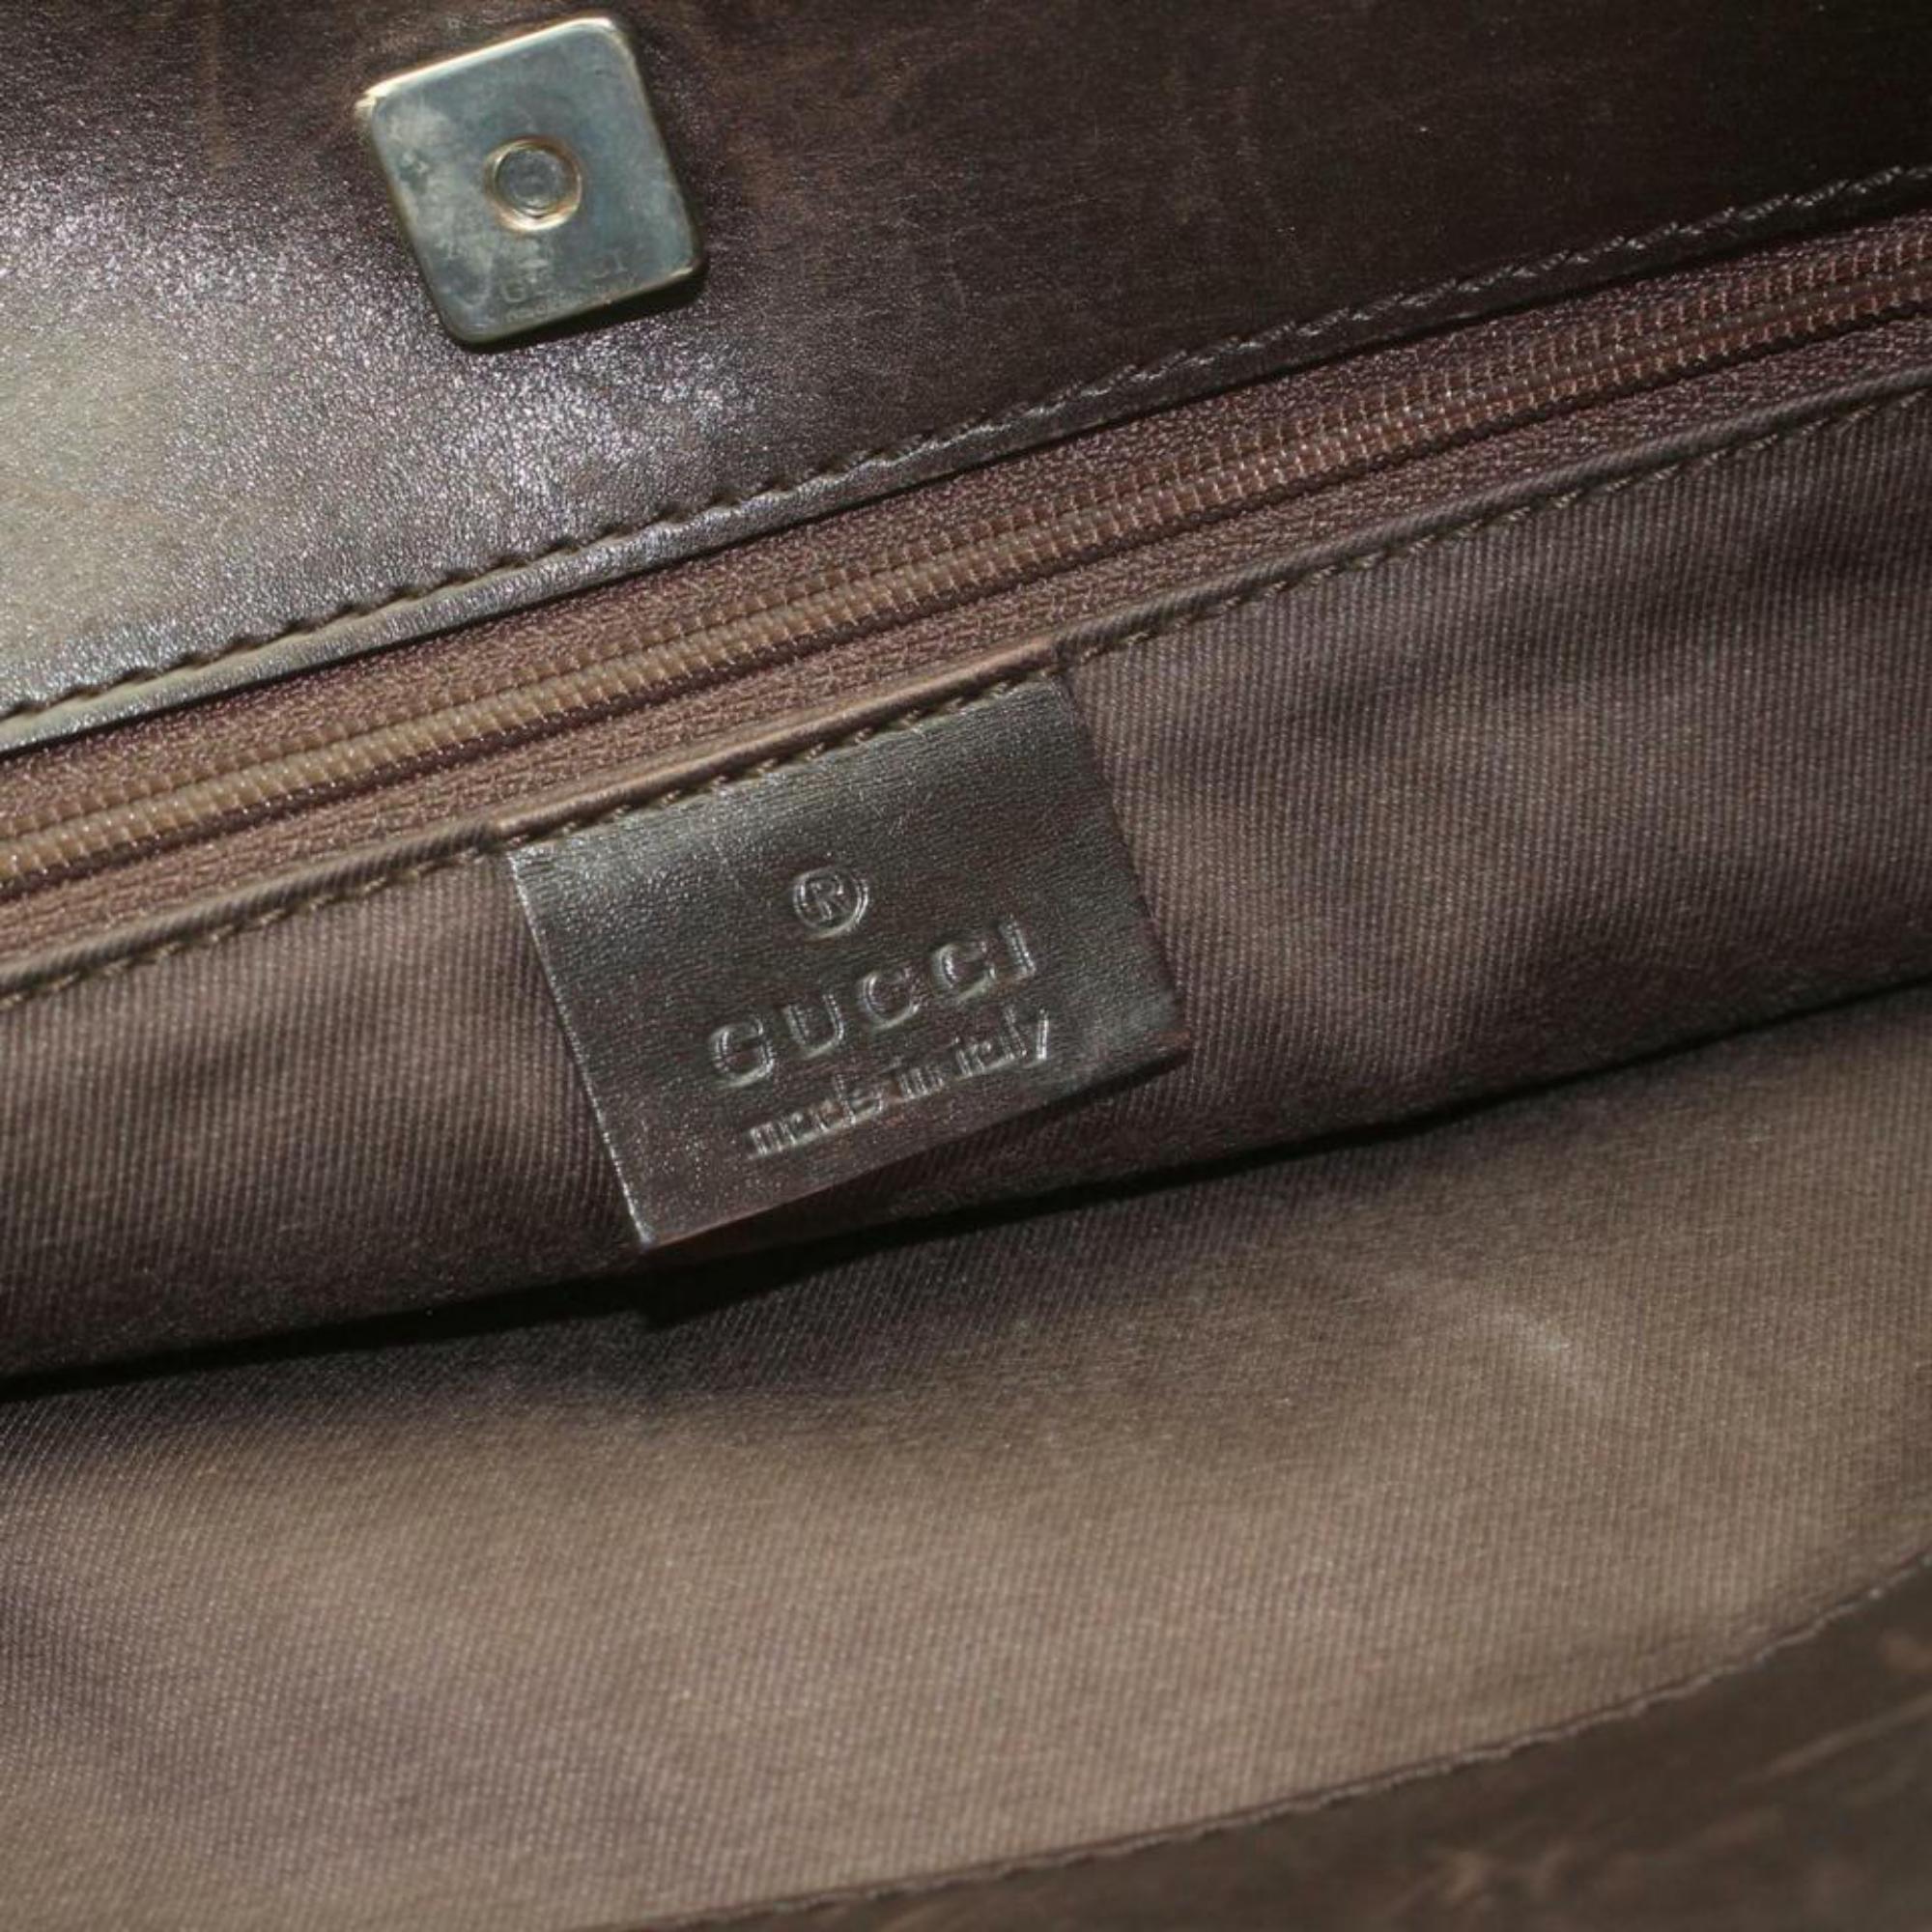 Gucci Monogram Signature Messenger 869979 Brown Canvas Shoulder Bag In Good Condition For Sale In Forest Hills, NY